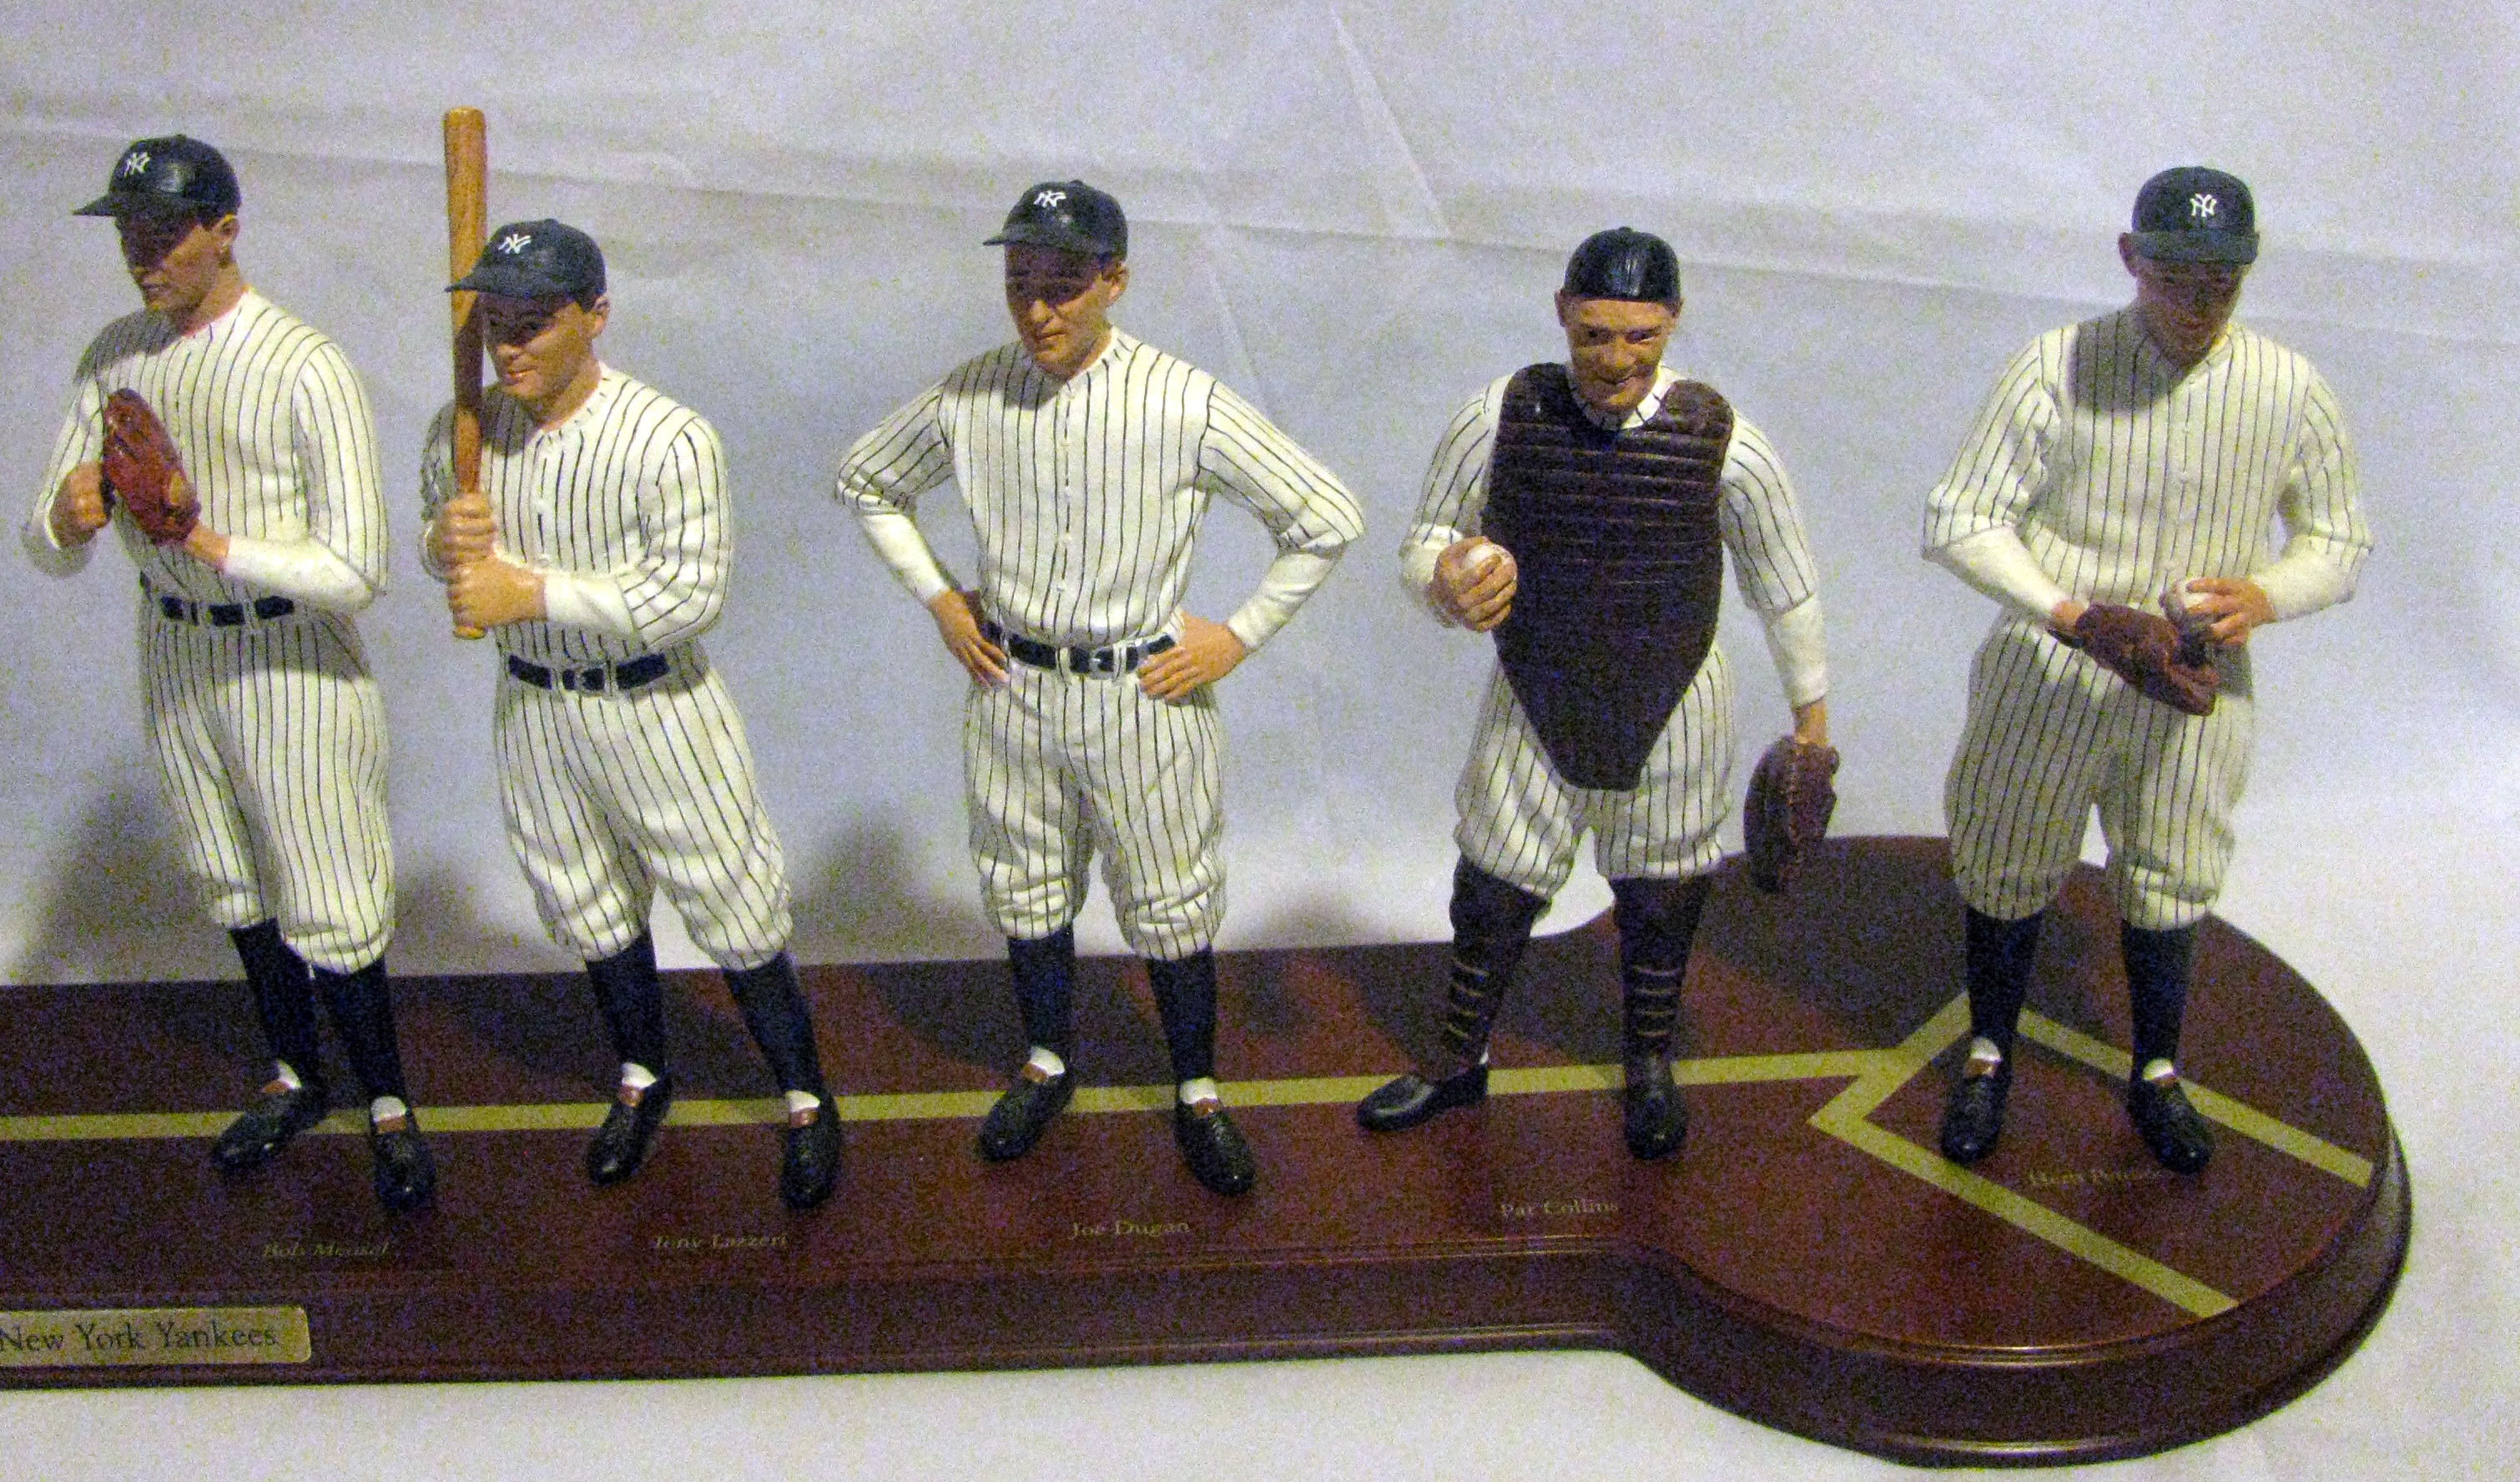 Sold at Auction: Collect. 1927 World Series NY YANKEES Sculpture